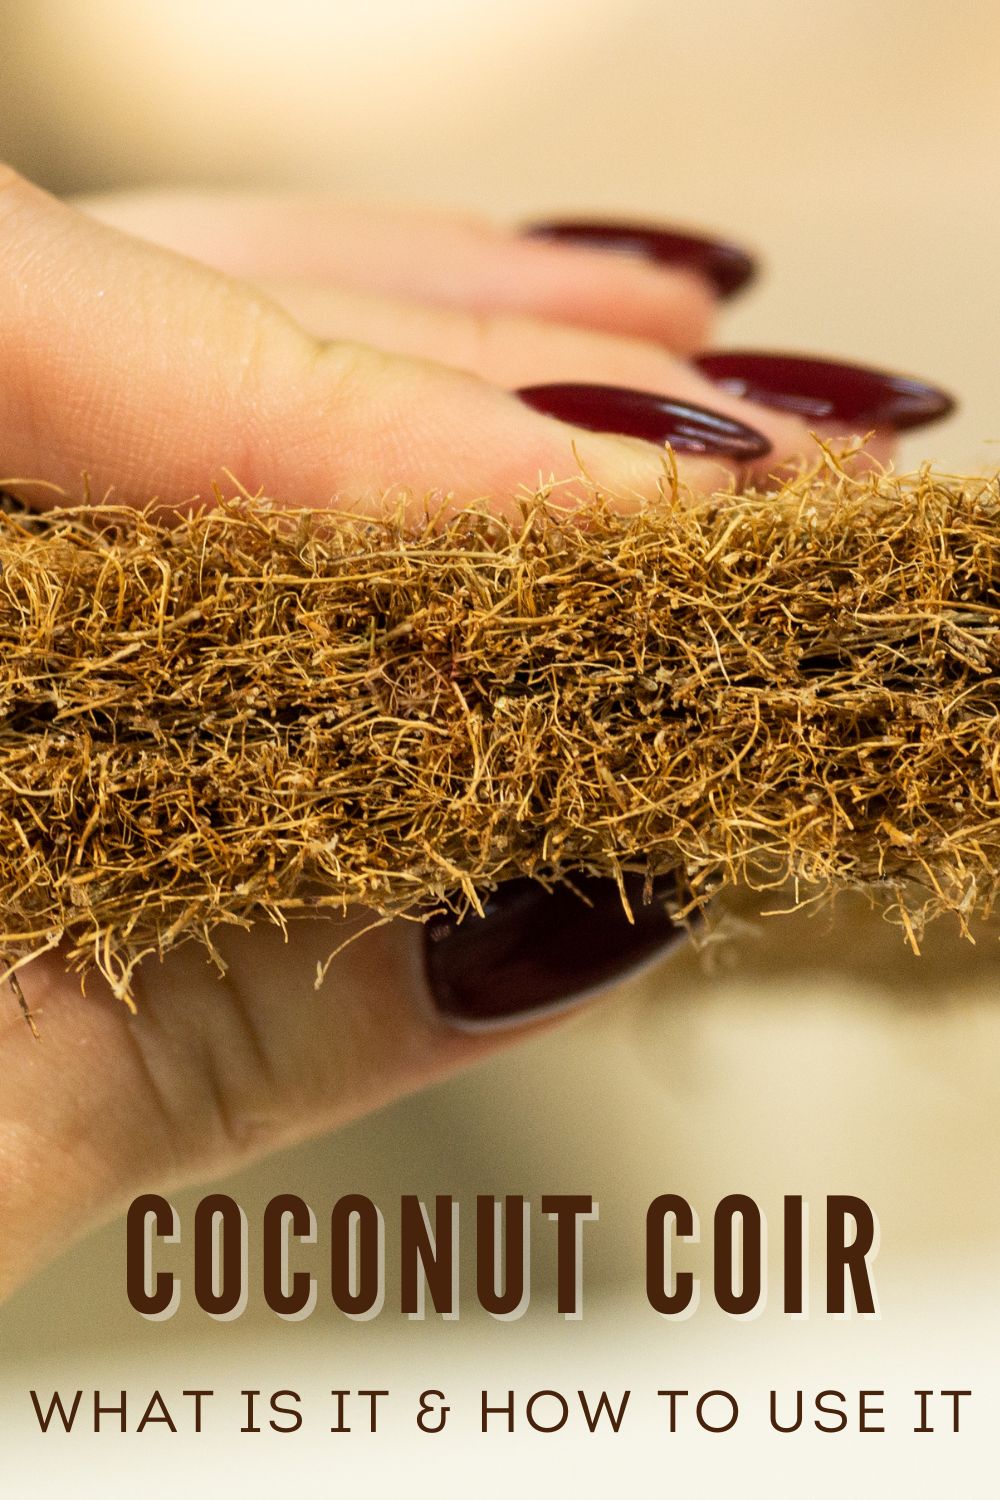 Coconut coir: what it is and how to use it.